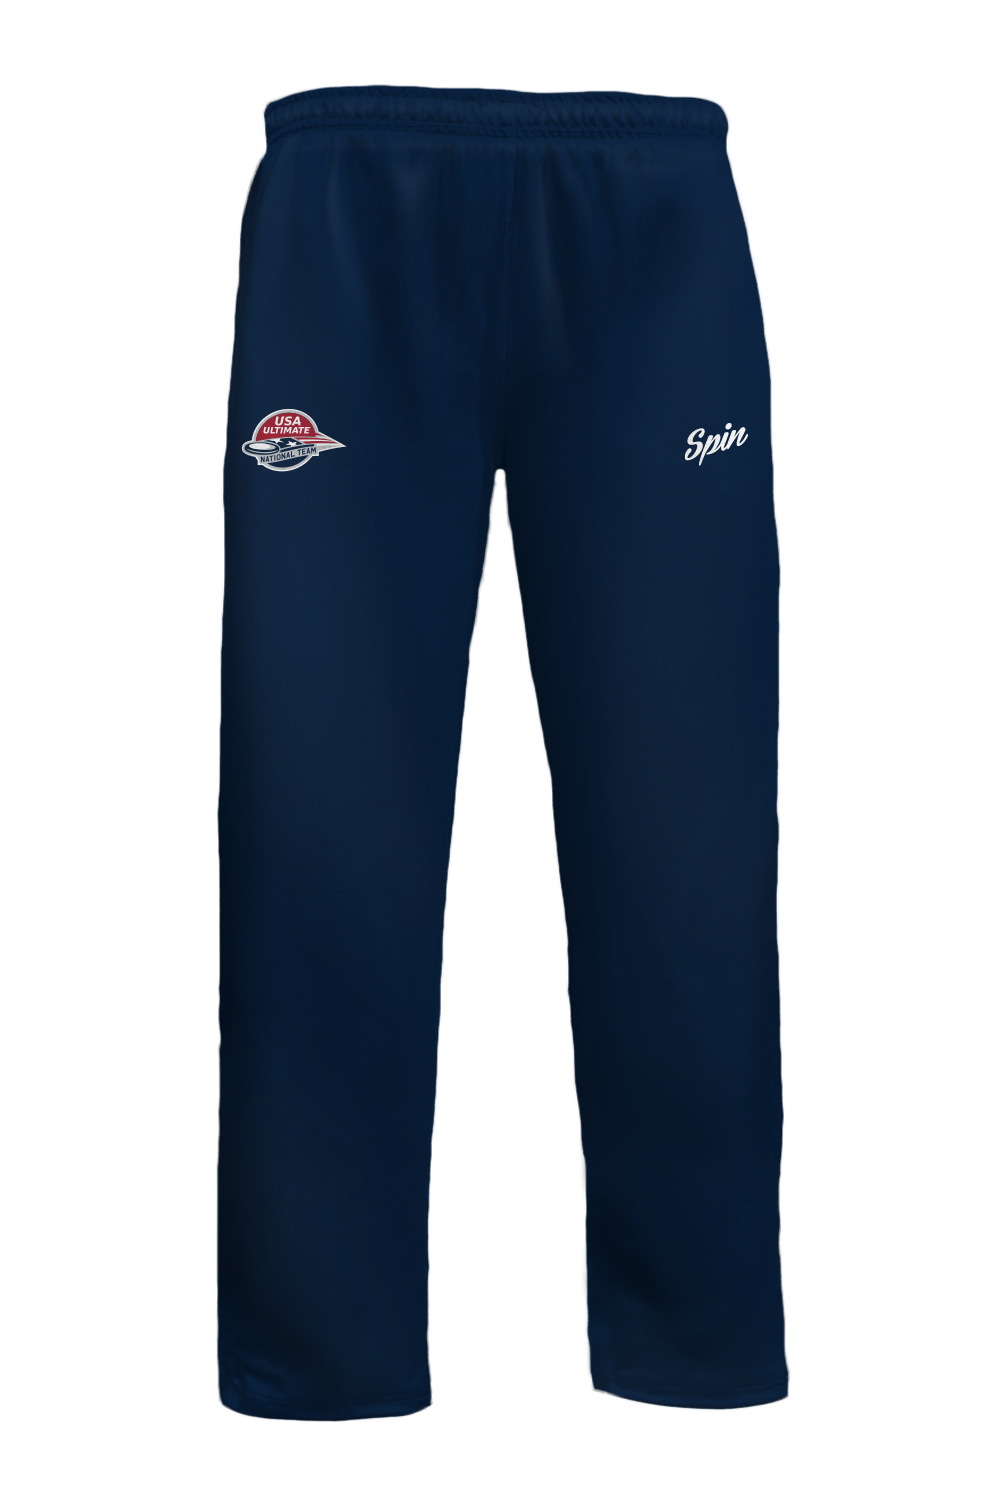 USNT Velocity Training Pants – Spin Ultimate